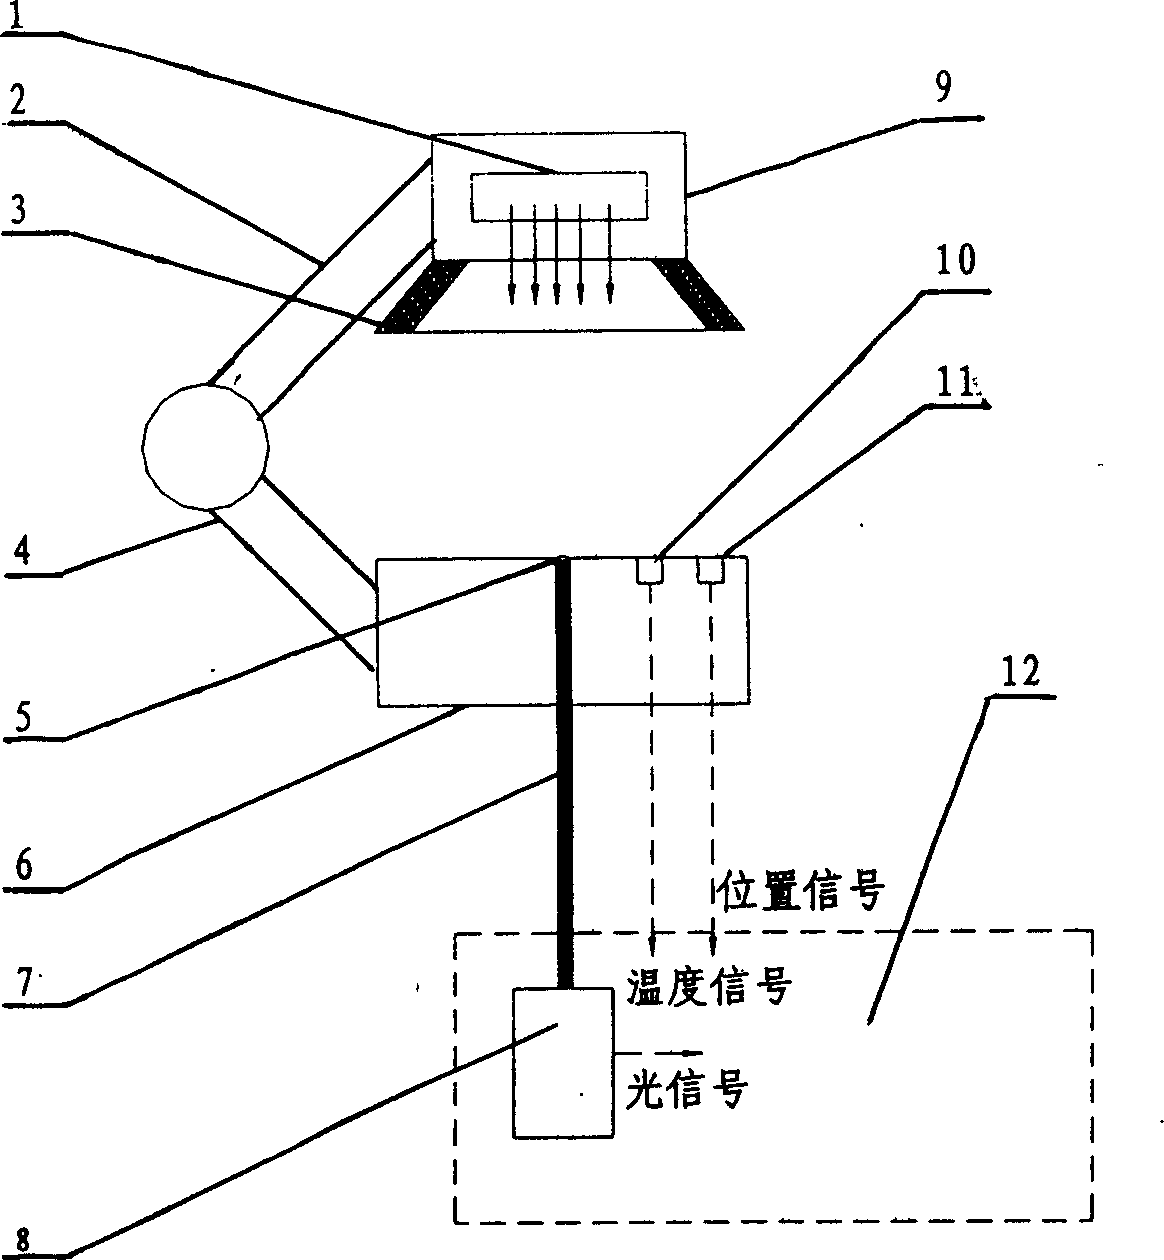 Plant growth information acquisition device based on near infrared spectrum